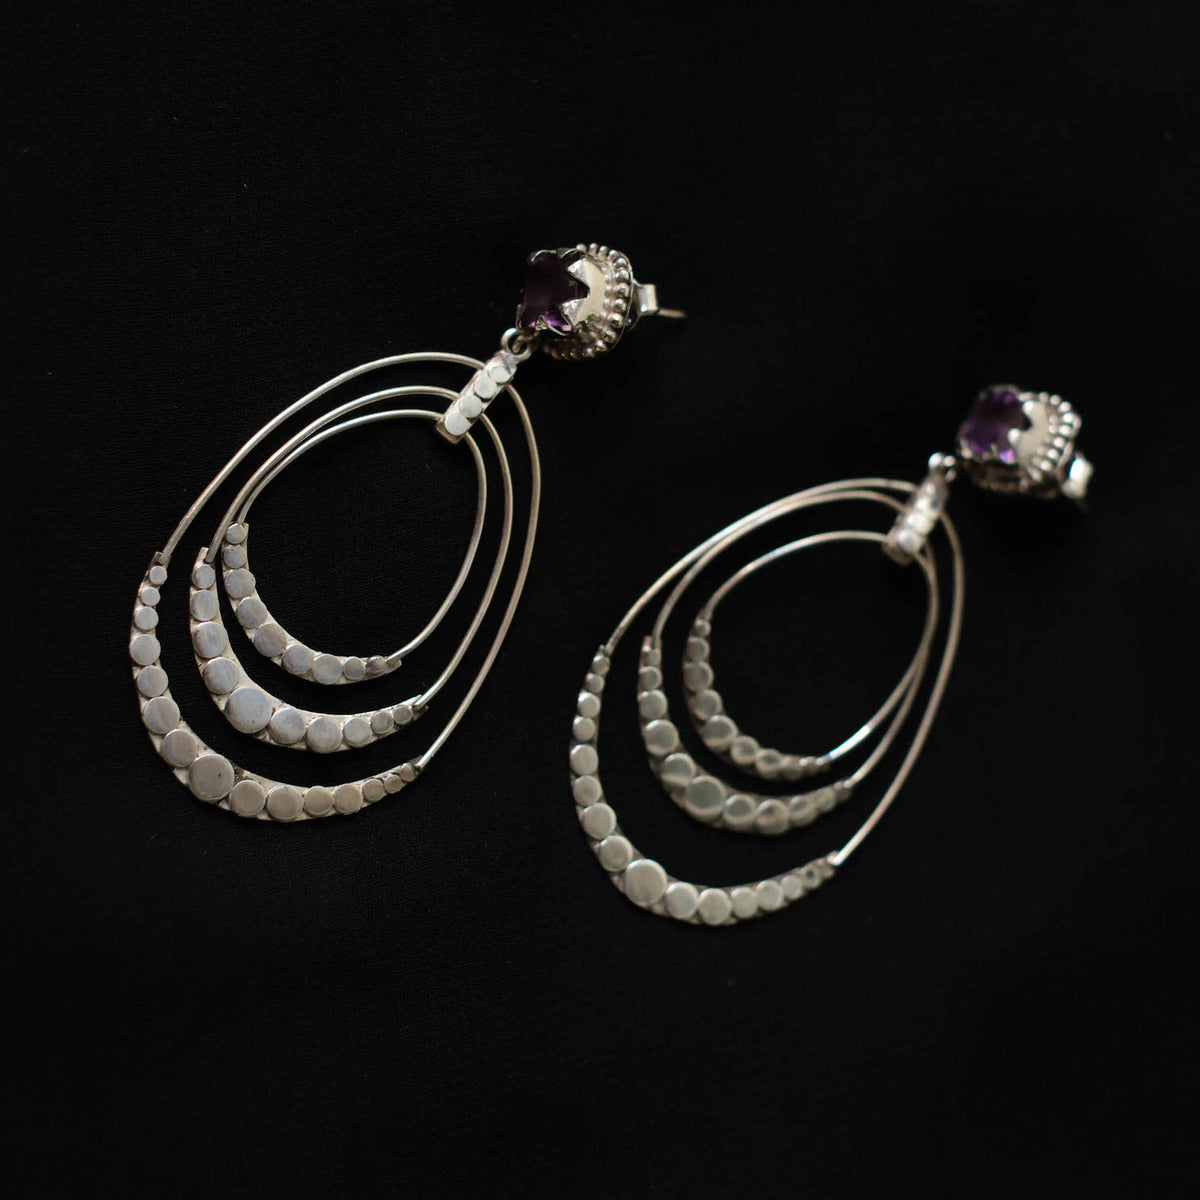 Earrings with faceted amethyst